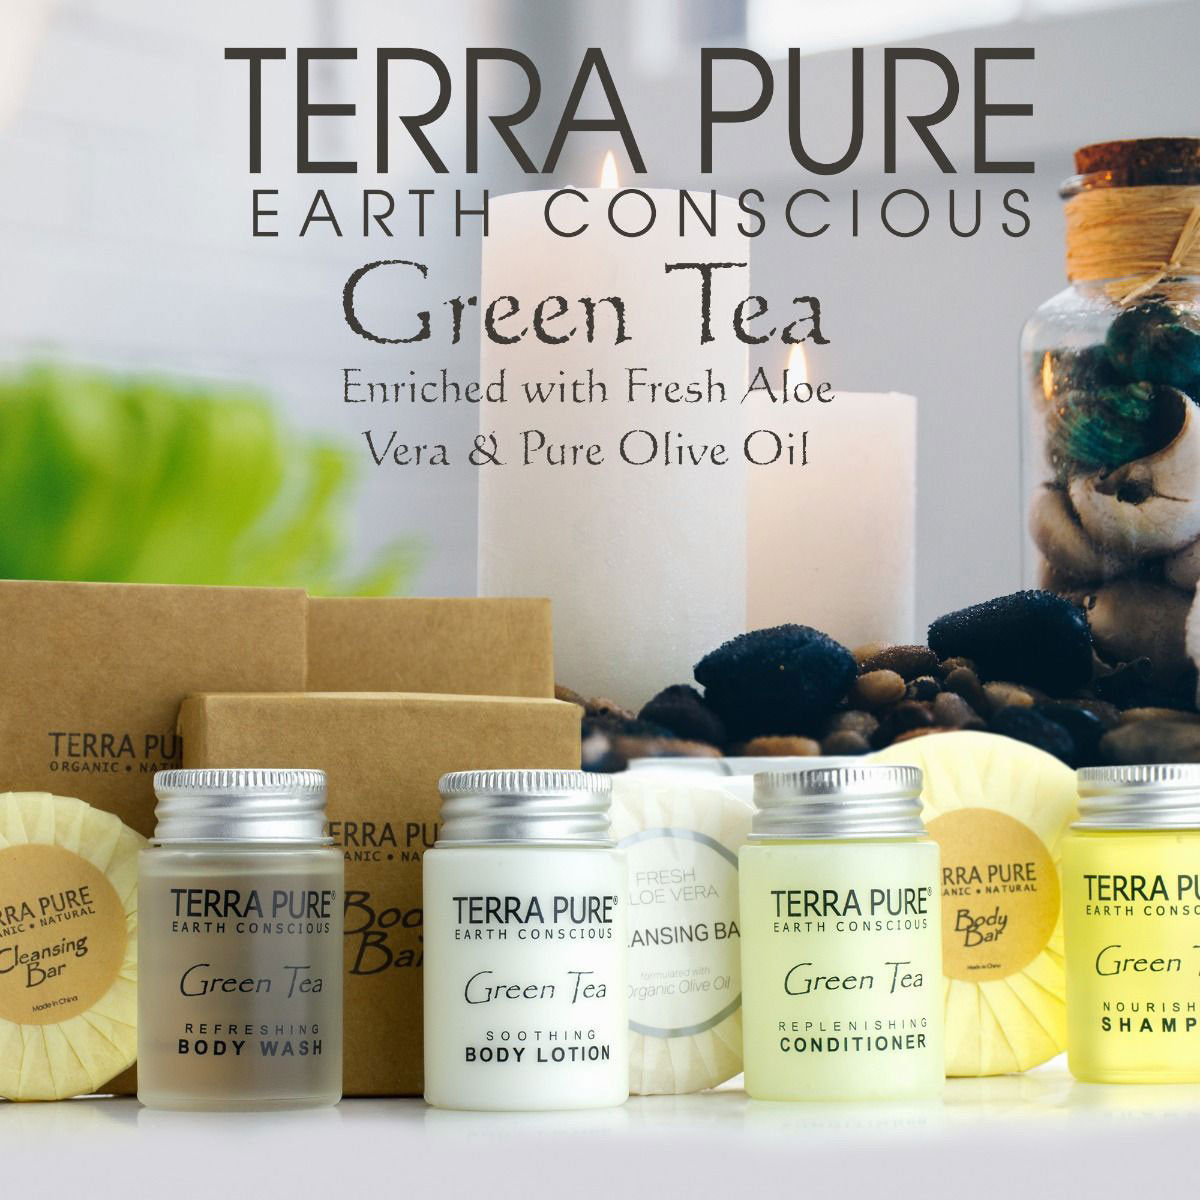 What formulas does the TERRA PURE GREEN TEA Collection use?